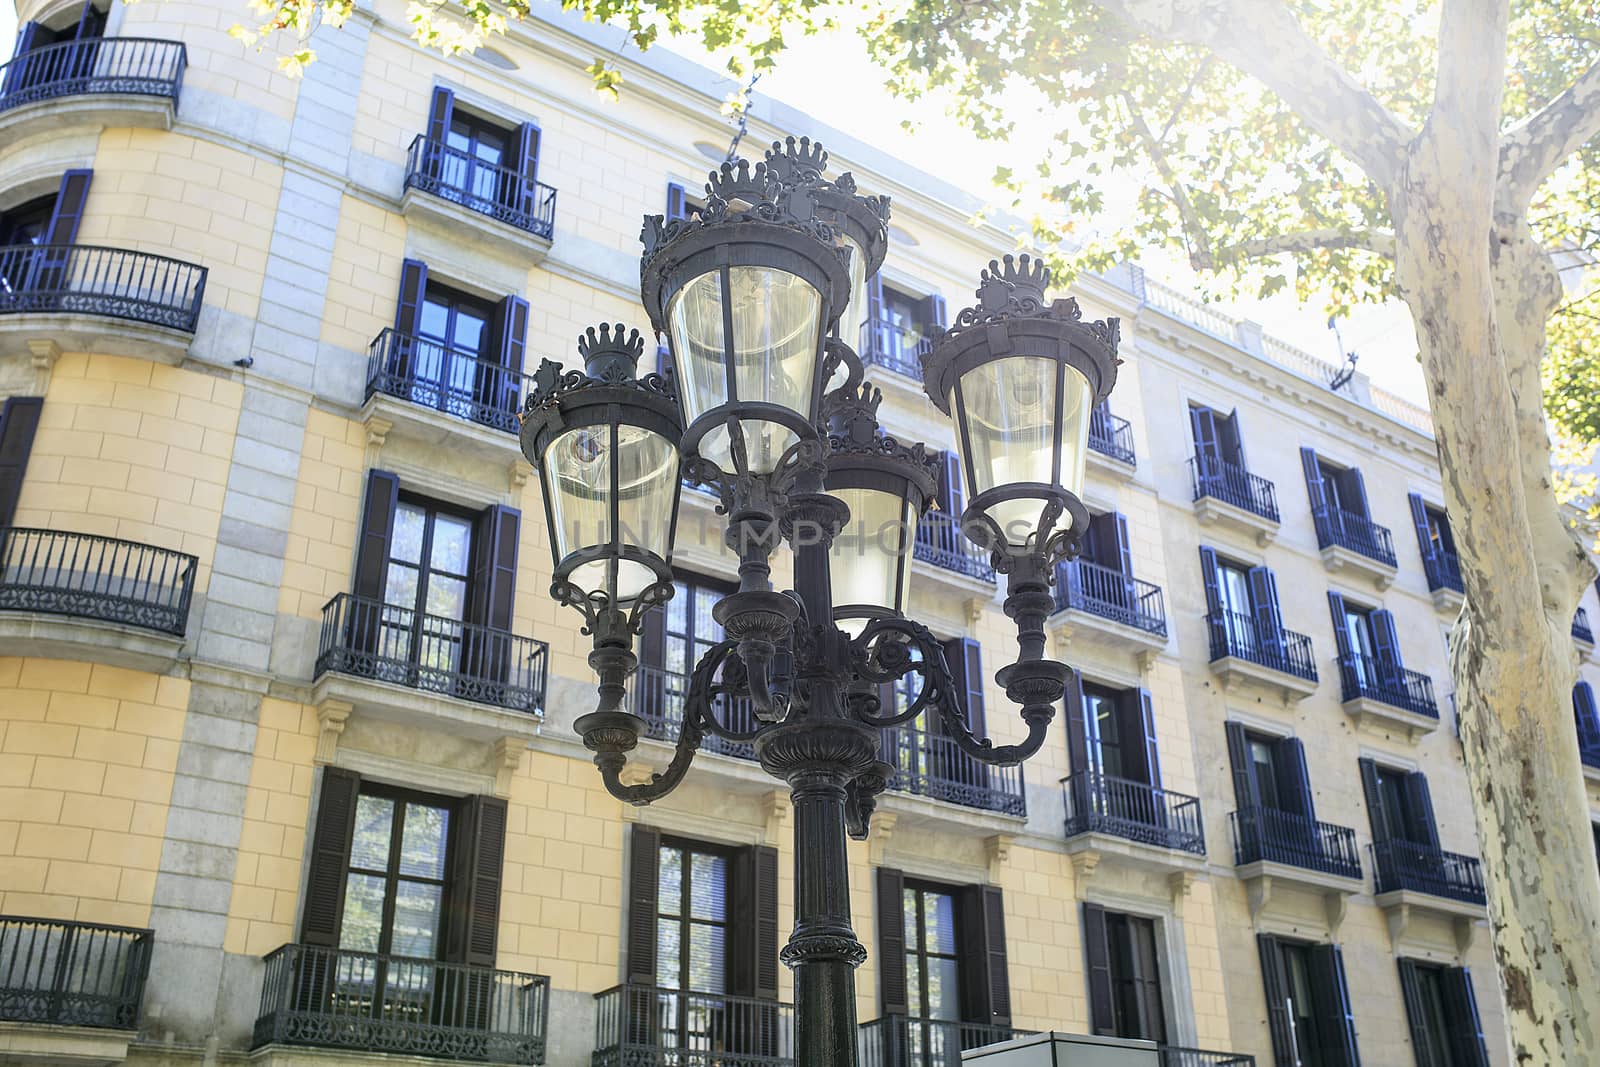 Tipycal street light sited in Barcelona by nachrc2001